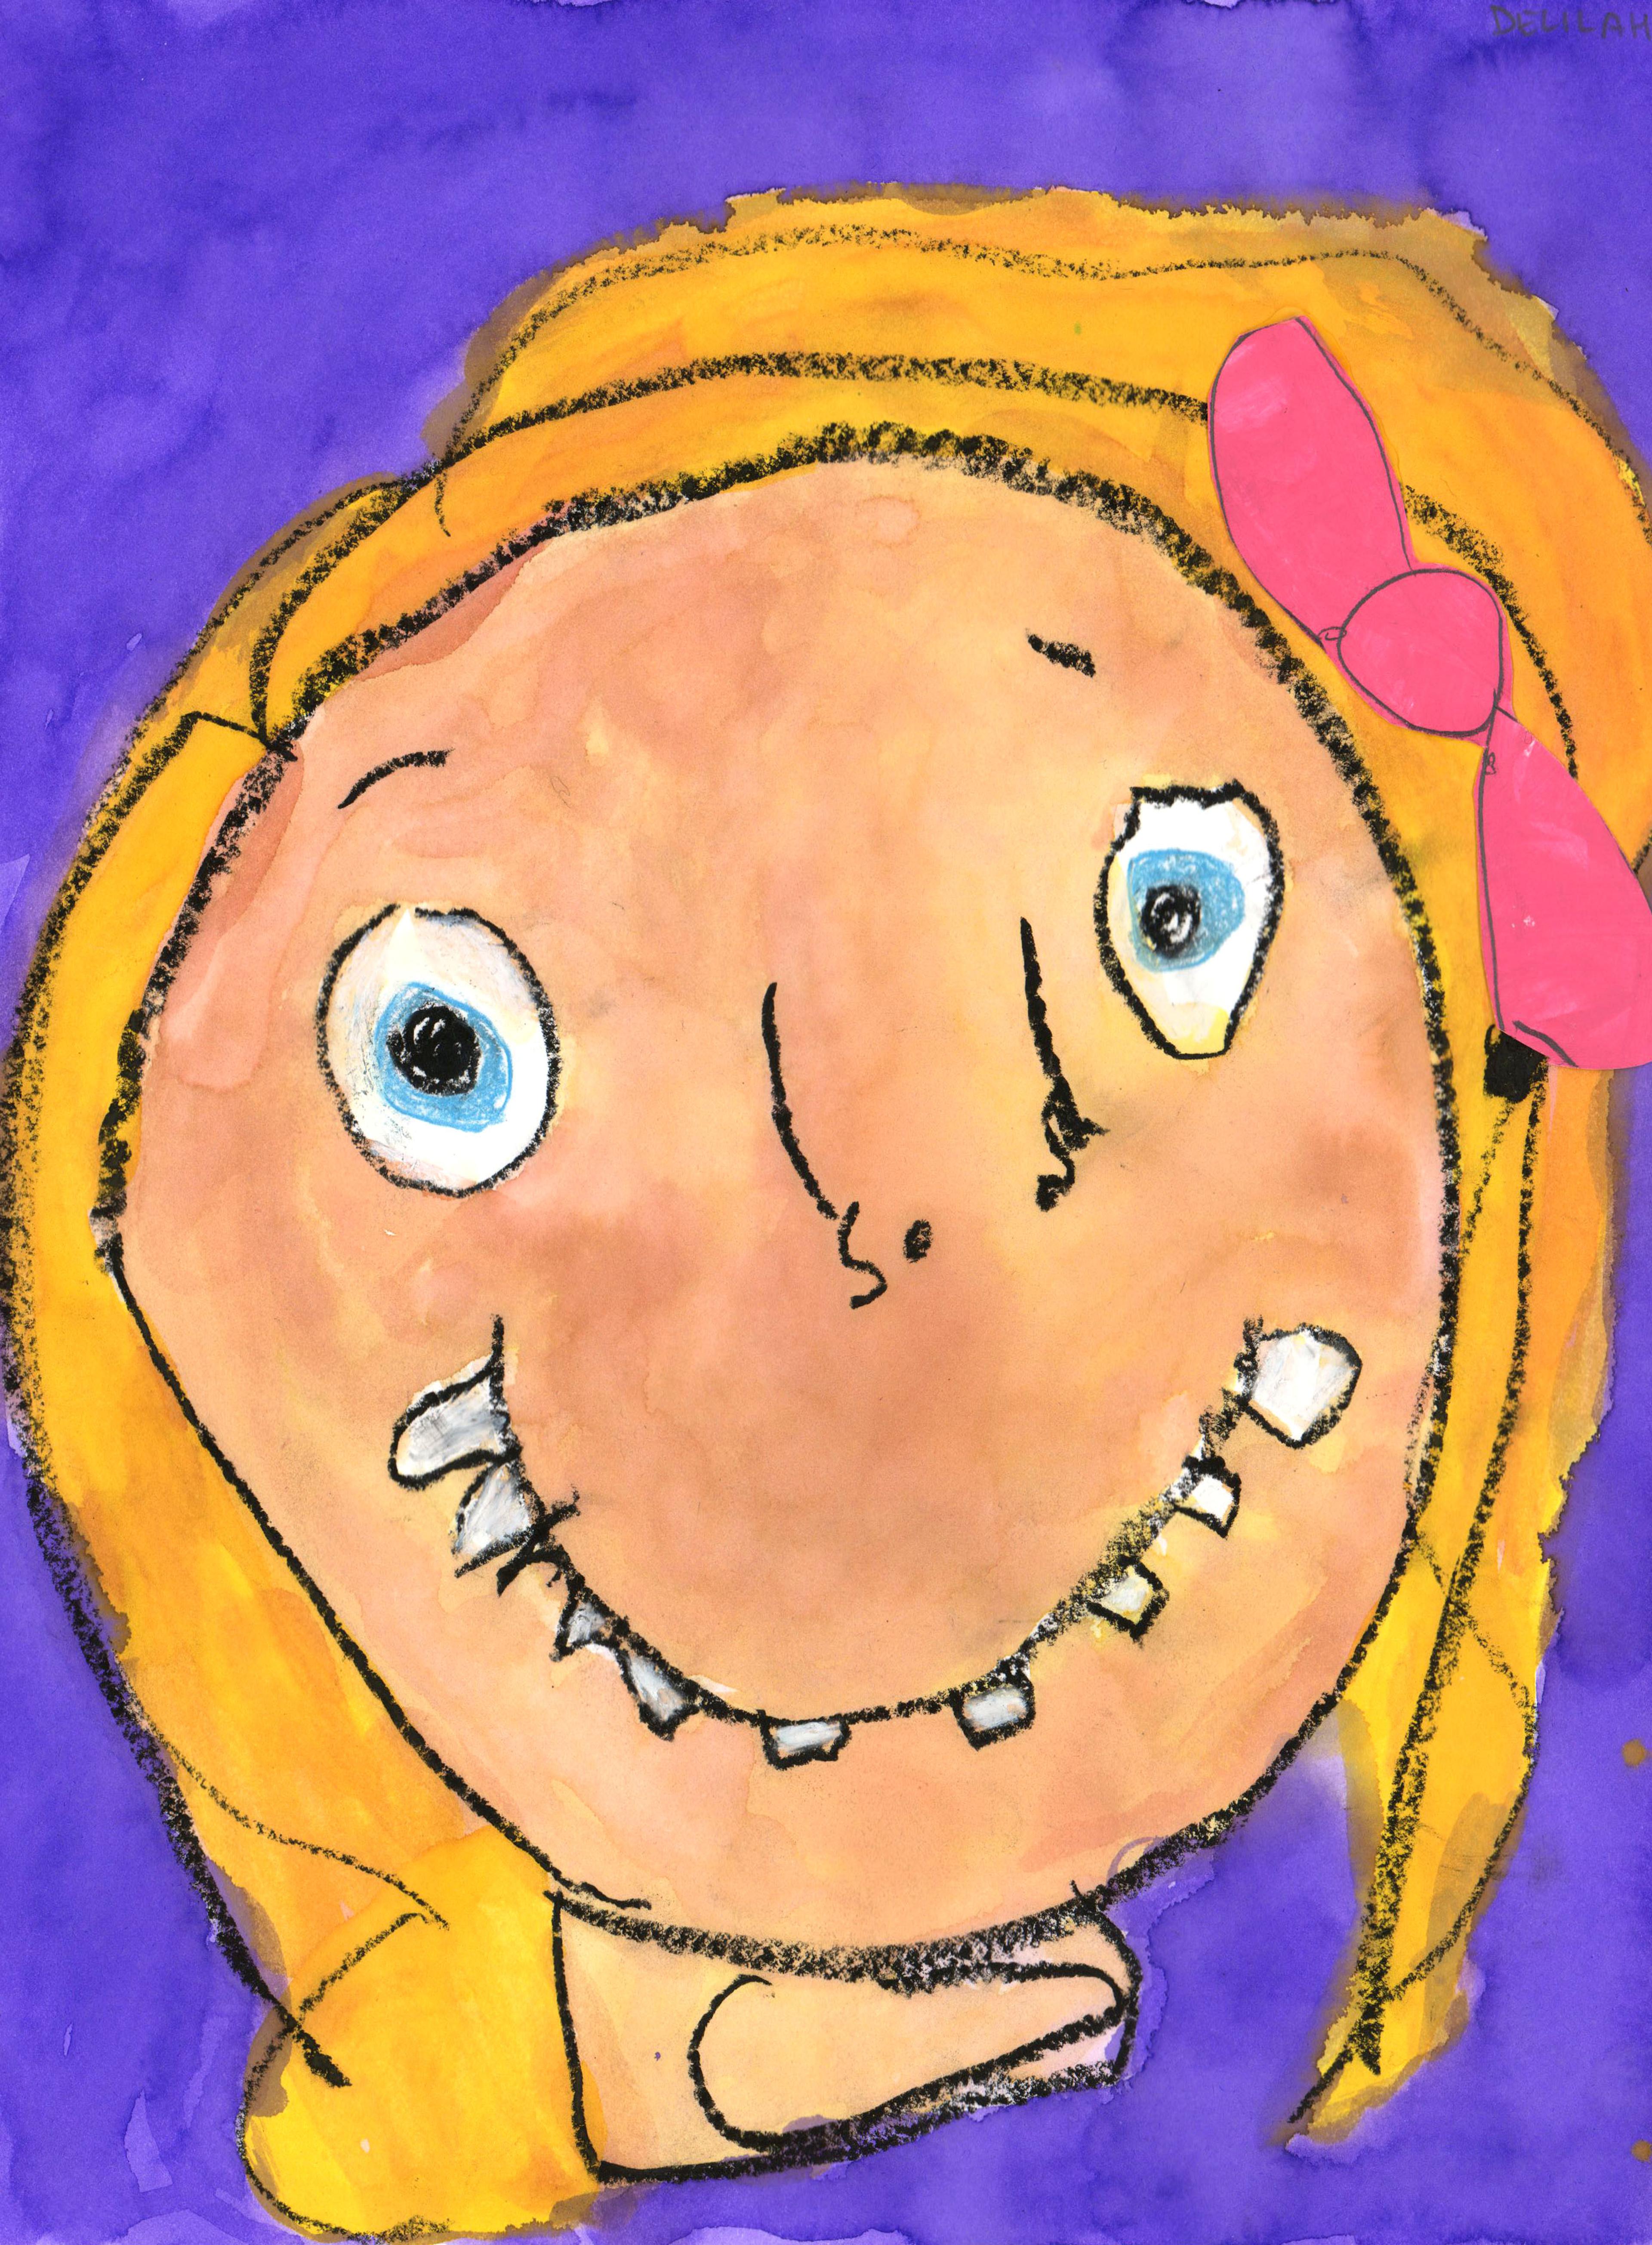 Mixed-media-collage self-portrait of a round-faced white girl with blond hair and wide blue eyes. She faces the viewer and smiles, her teeth emerging from her closed mouth. She wears a bright pink bow in her hair to the right, and the background is blue. Her features are outlined in black pastel strokes.